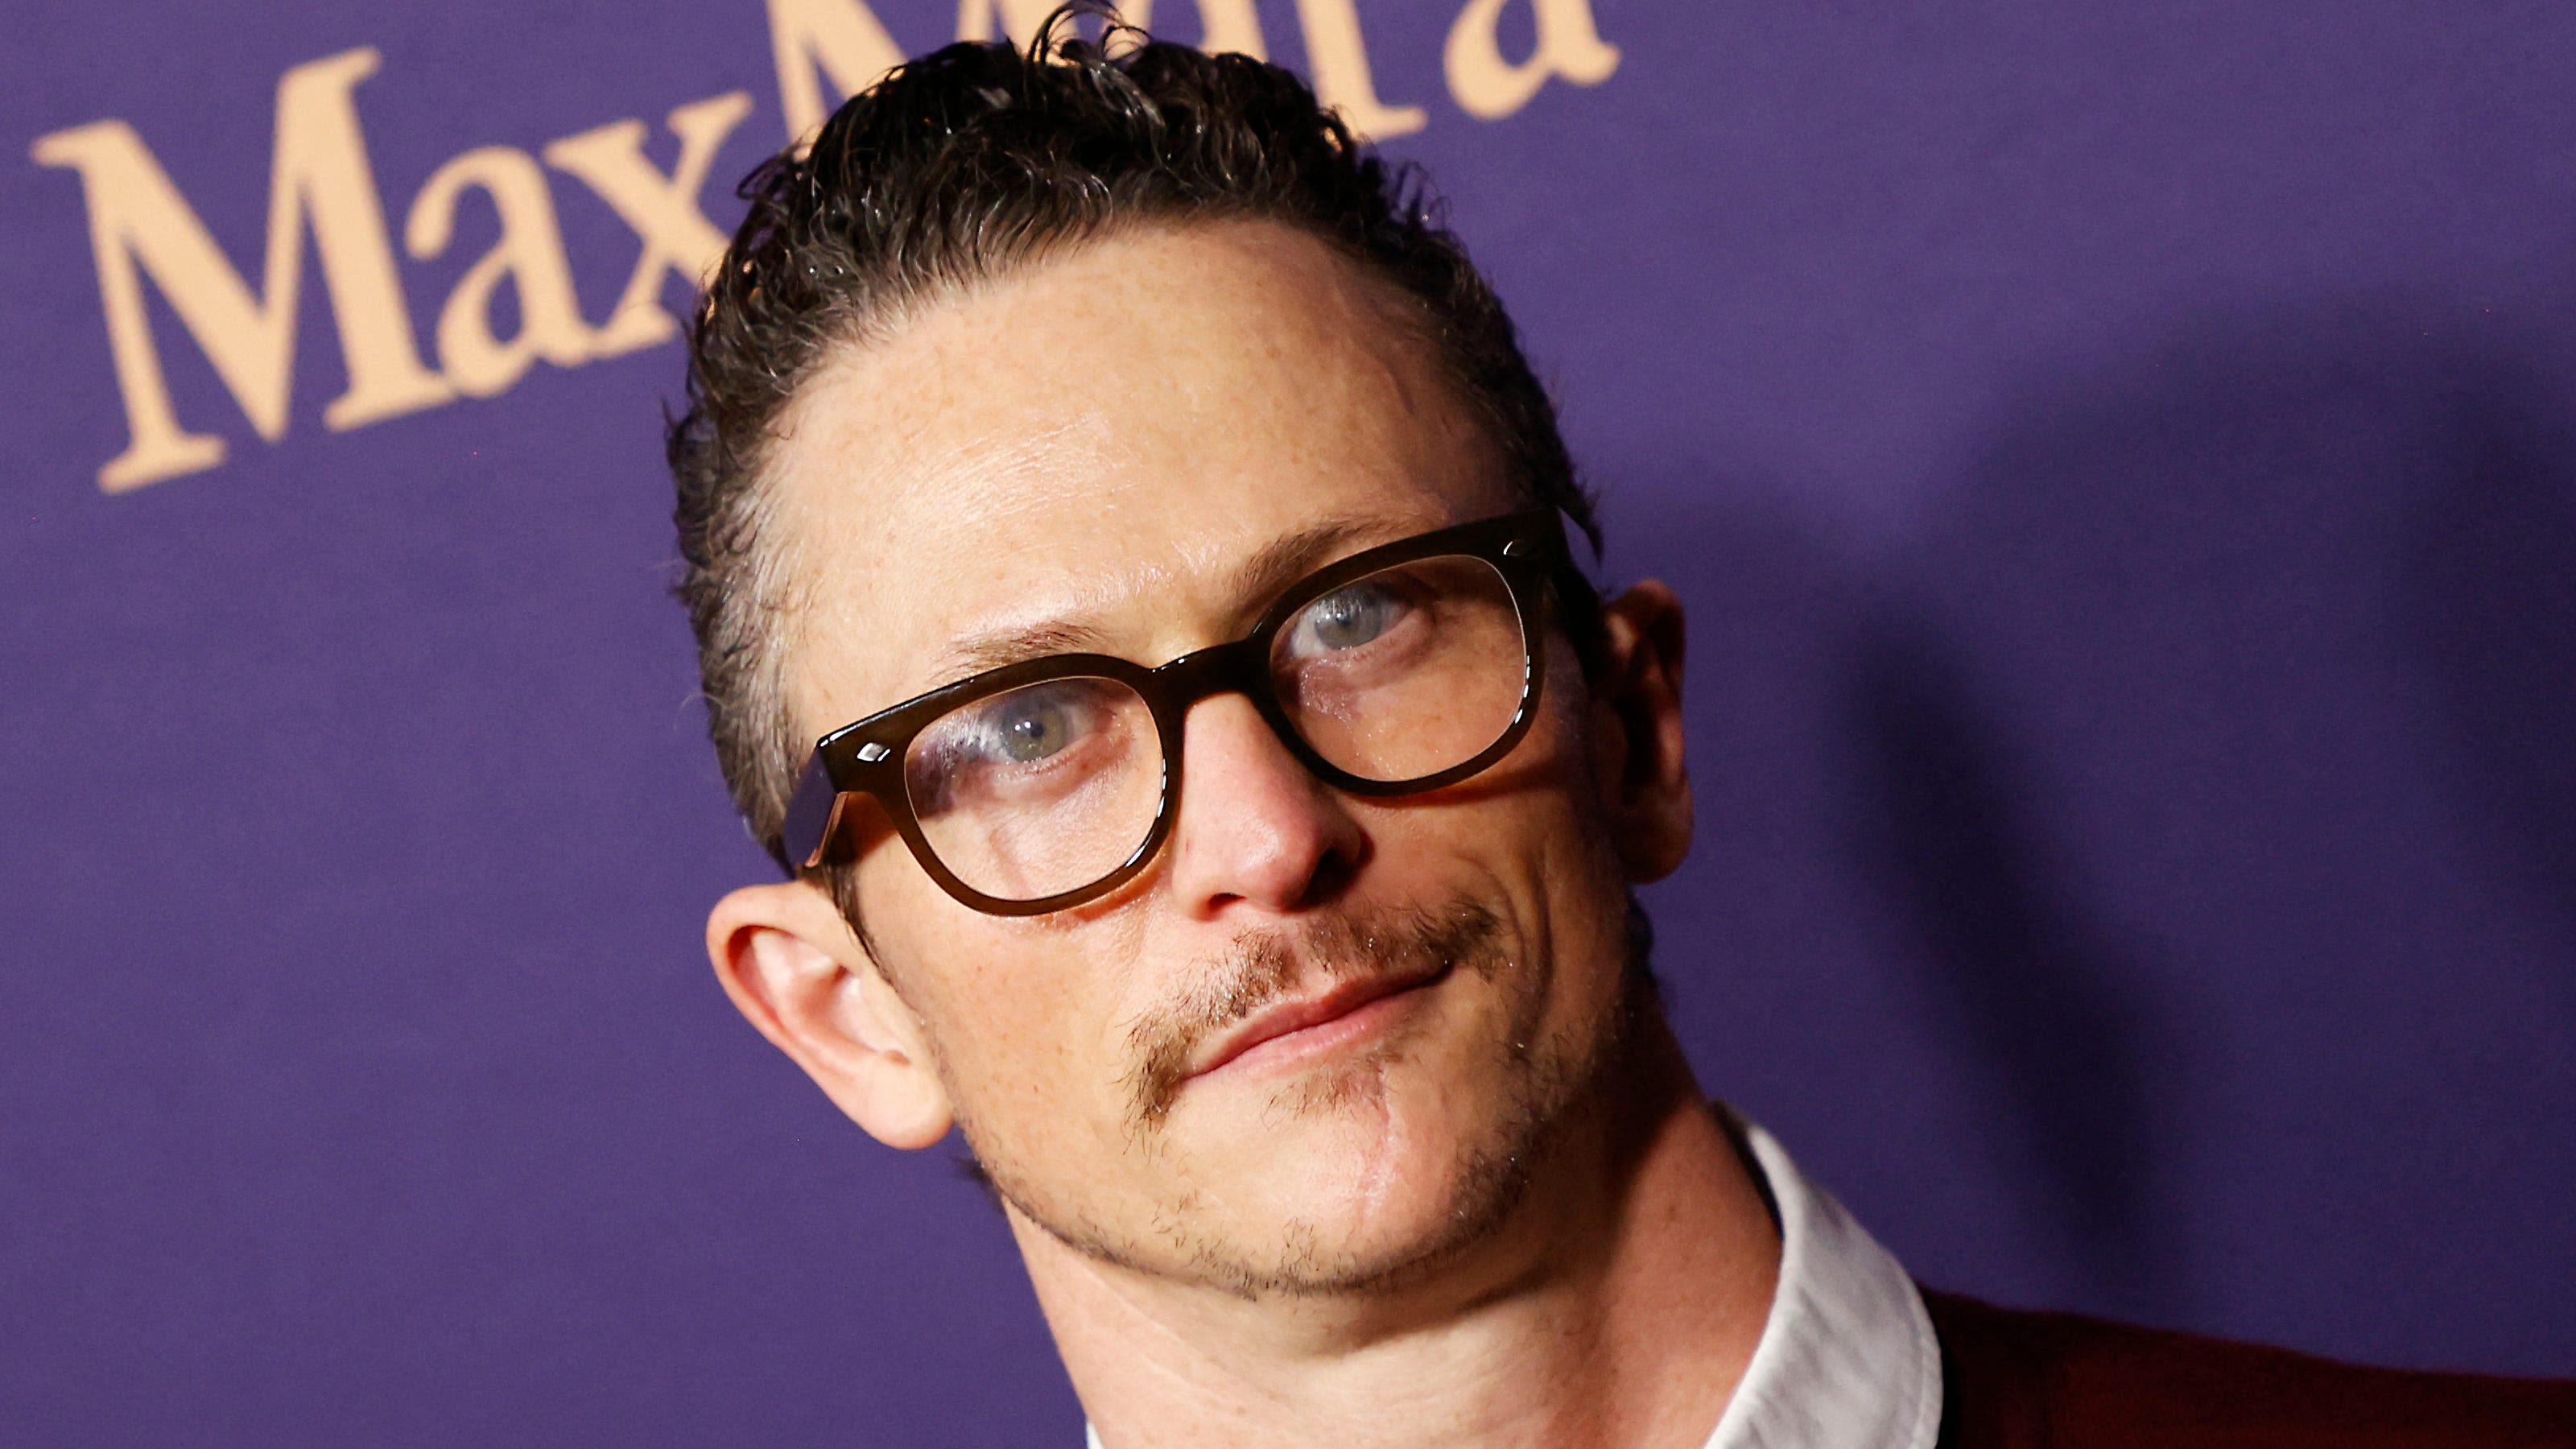 'Kingdom' star Jonathan Tucker helps neighbors to safety during home invasion incident